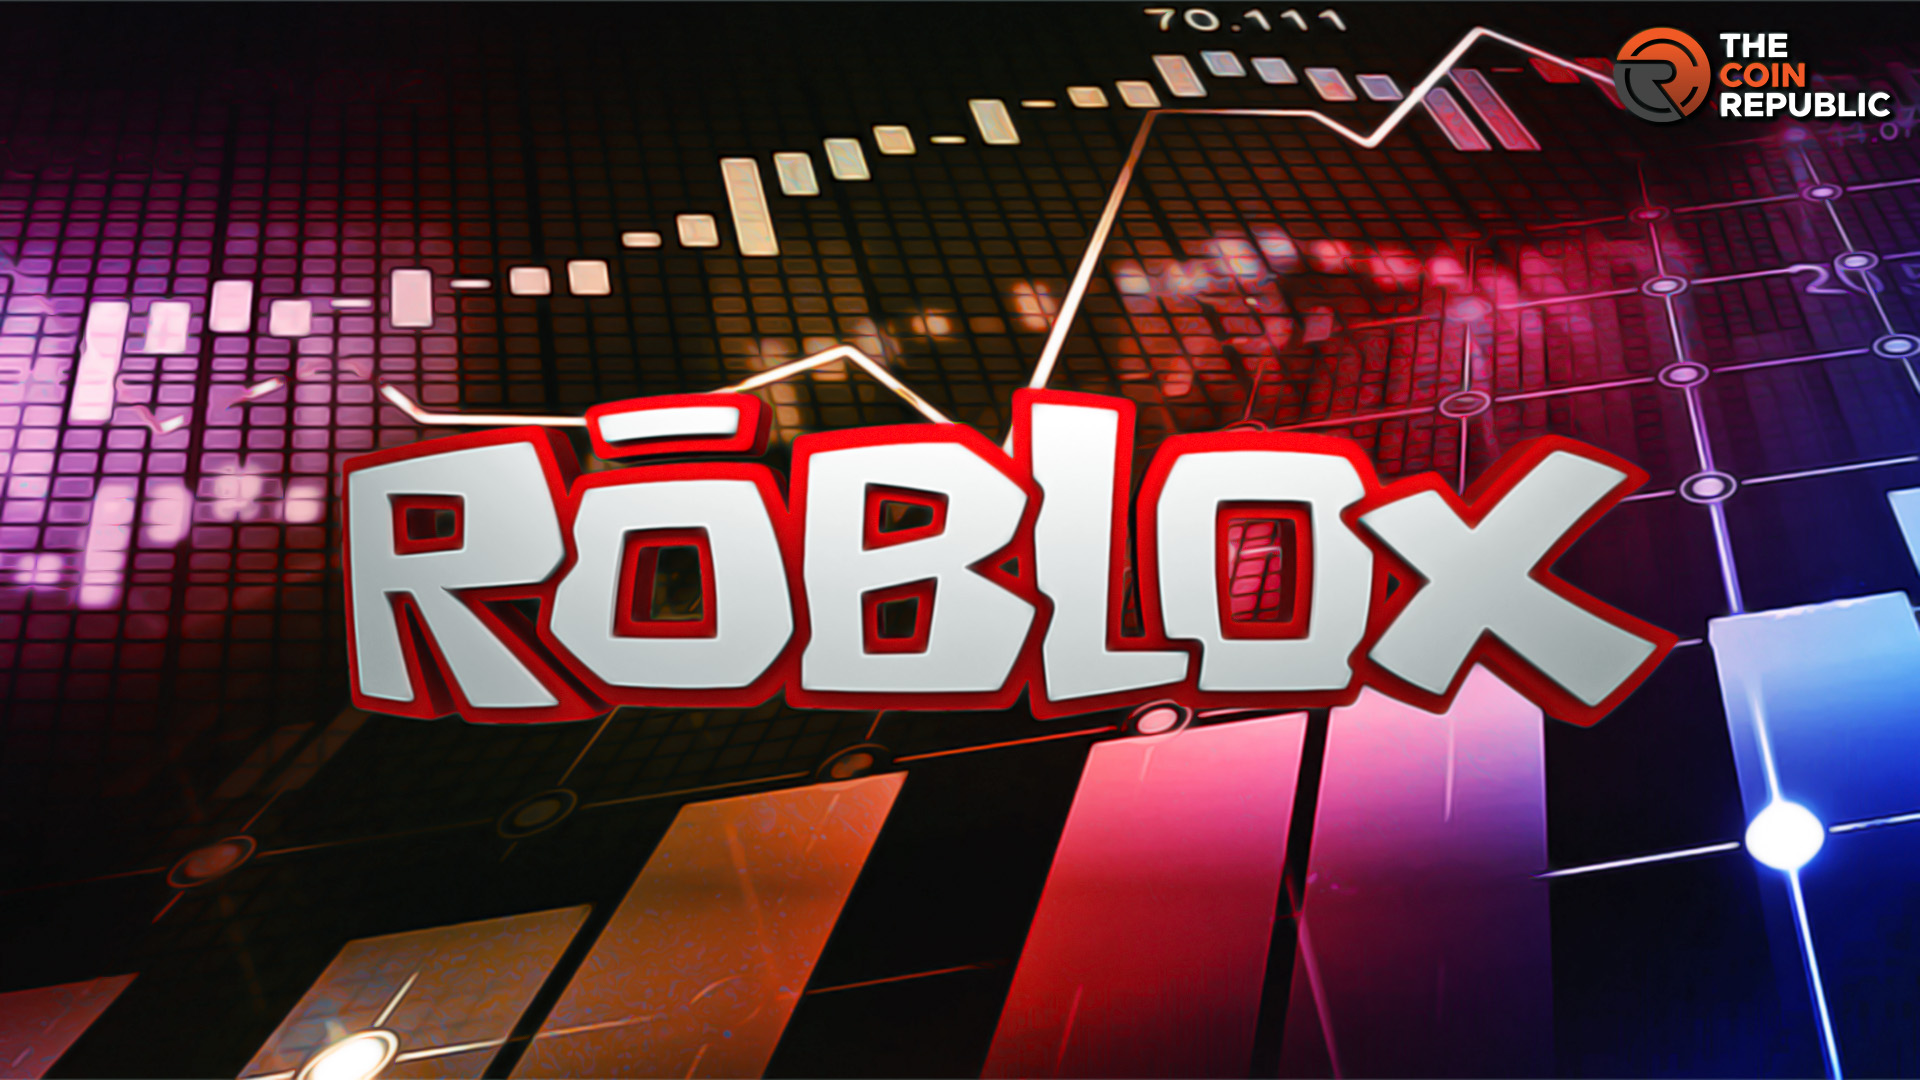 Will Roblox (RBLX) Stock Price Fall More Ahead of its Earnings?